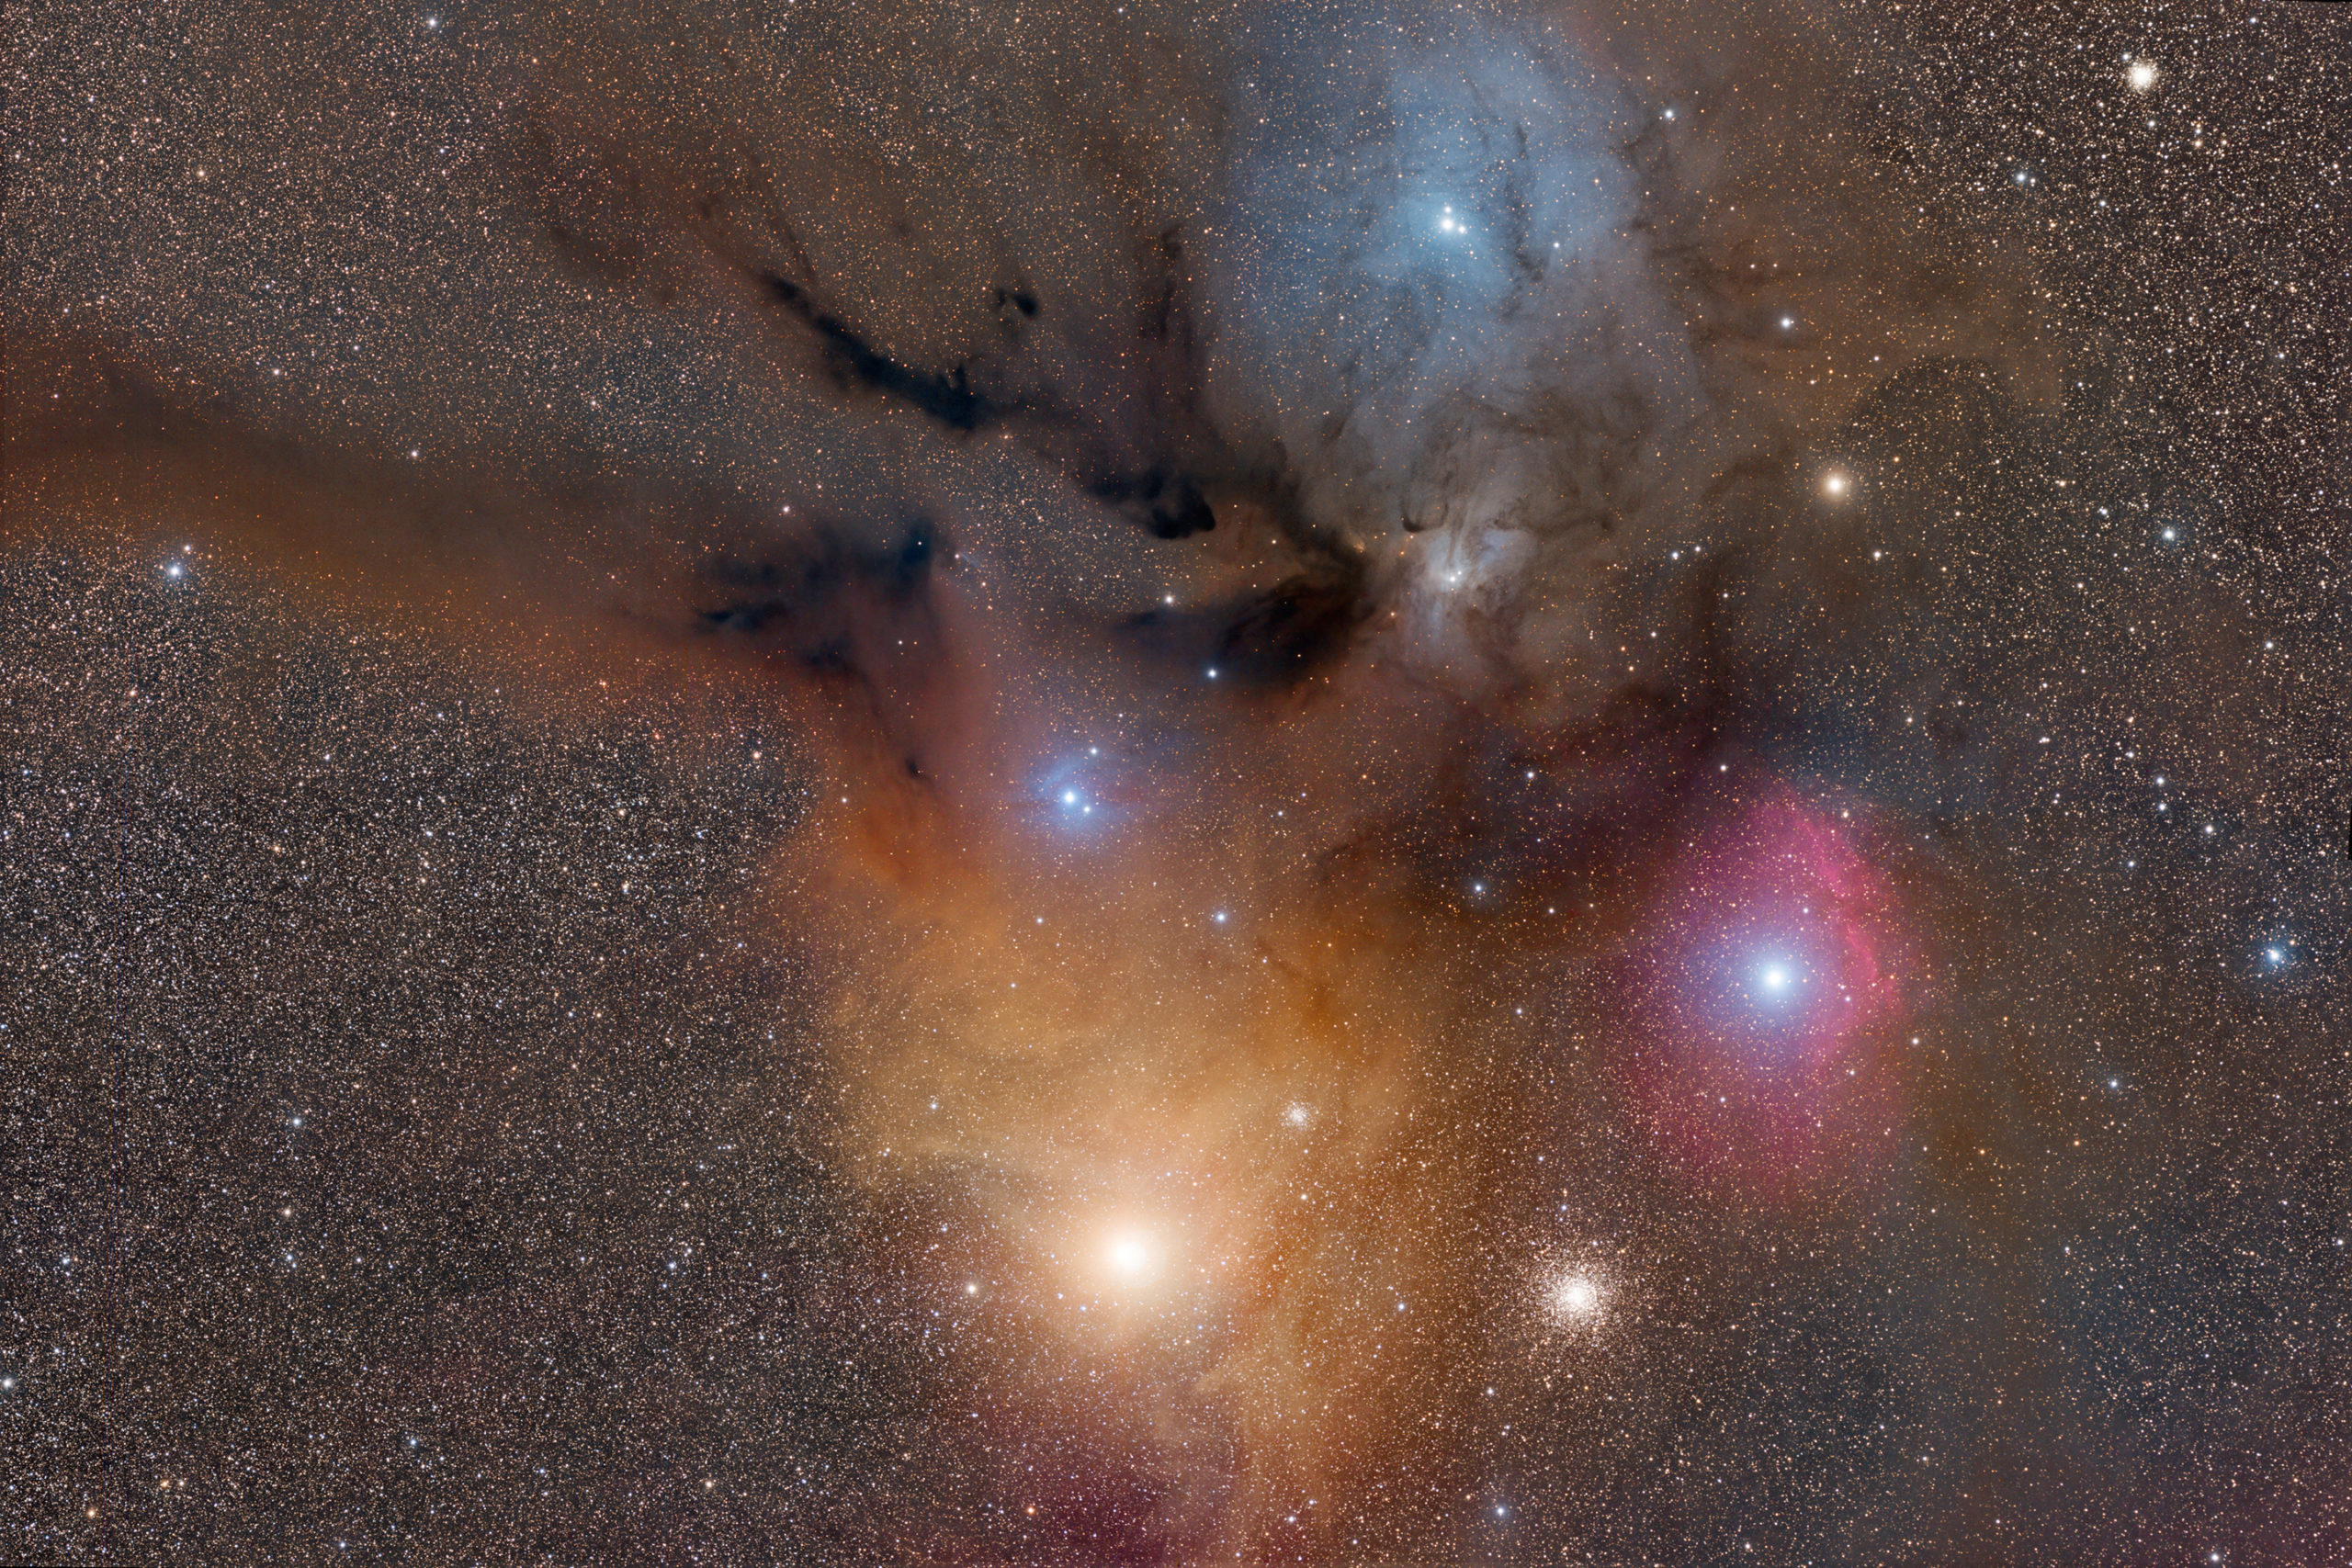 The Best Damn Astronomy Photos You’ll See This Year